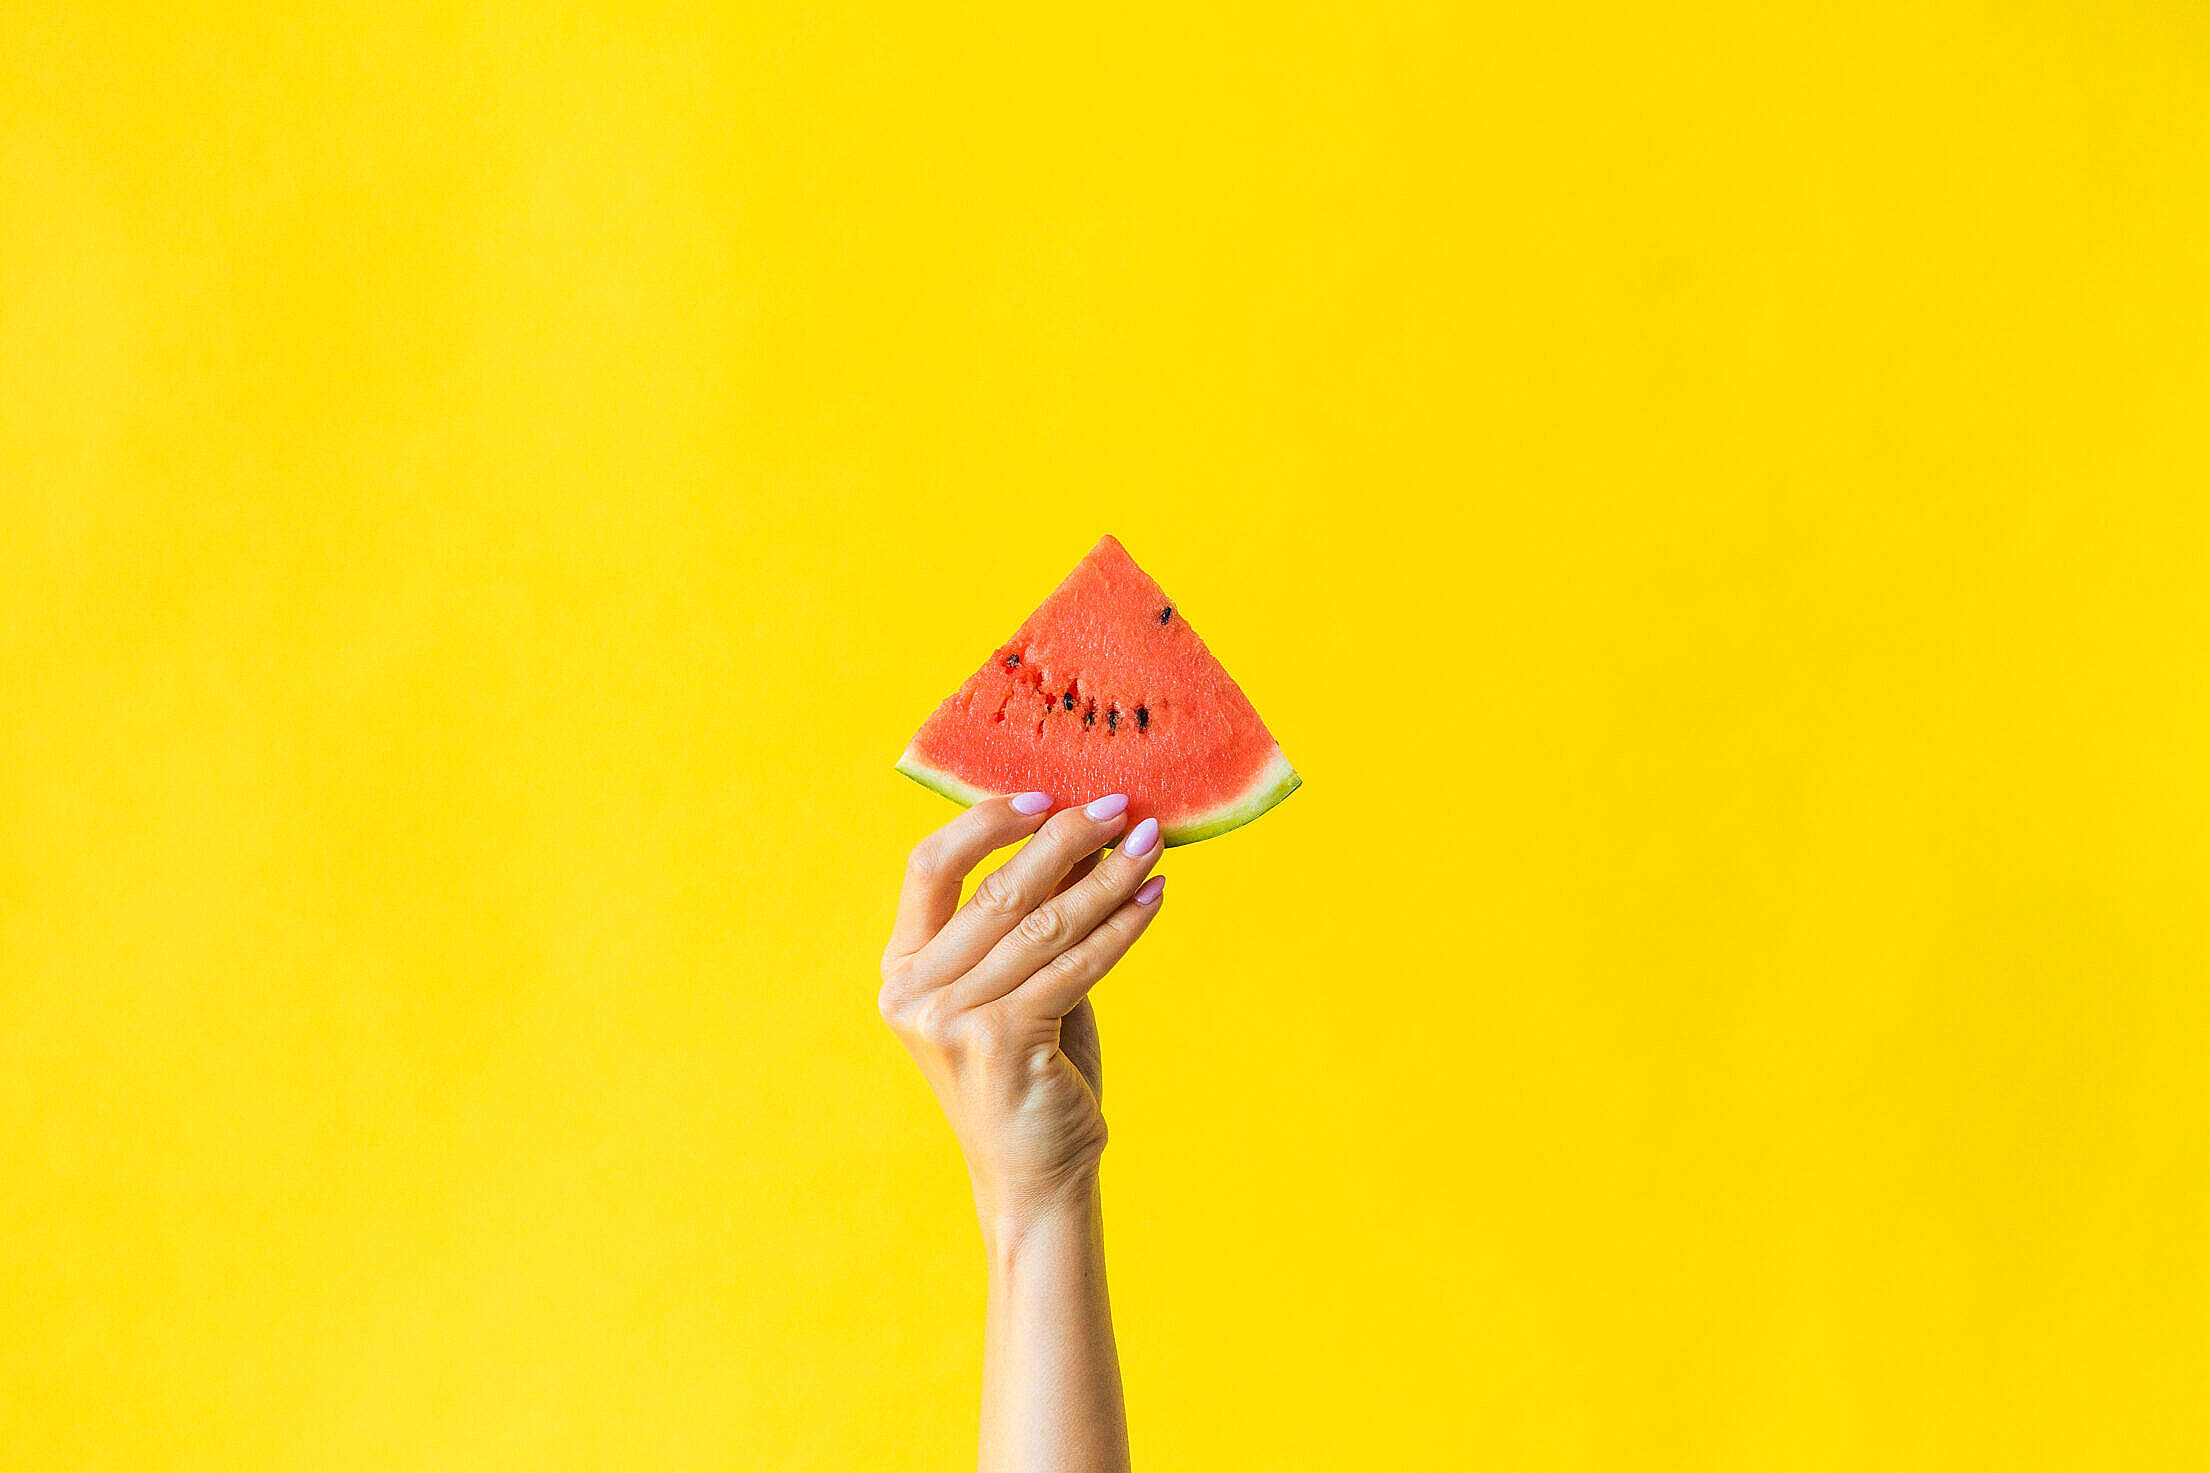 Slice of Watermelon in Woman Hand on Bright Yellow Background Free Stock Photo